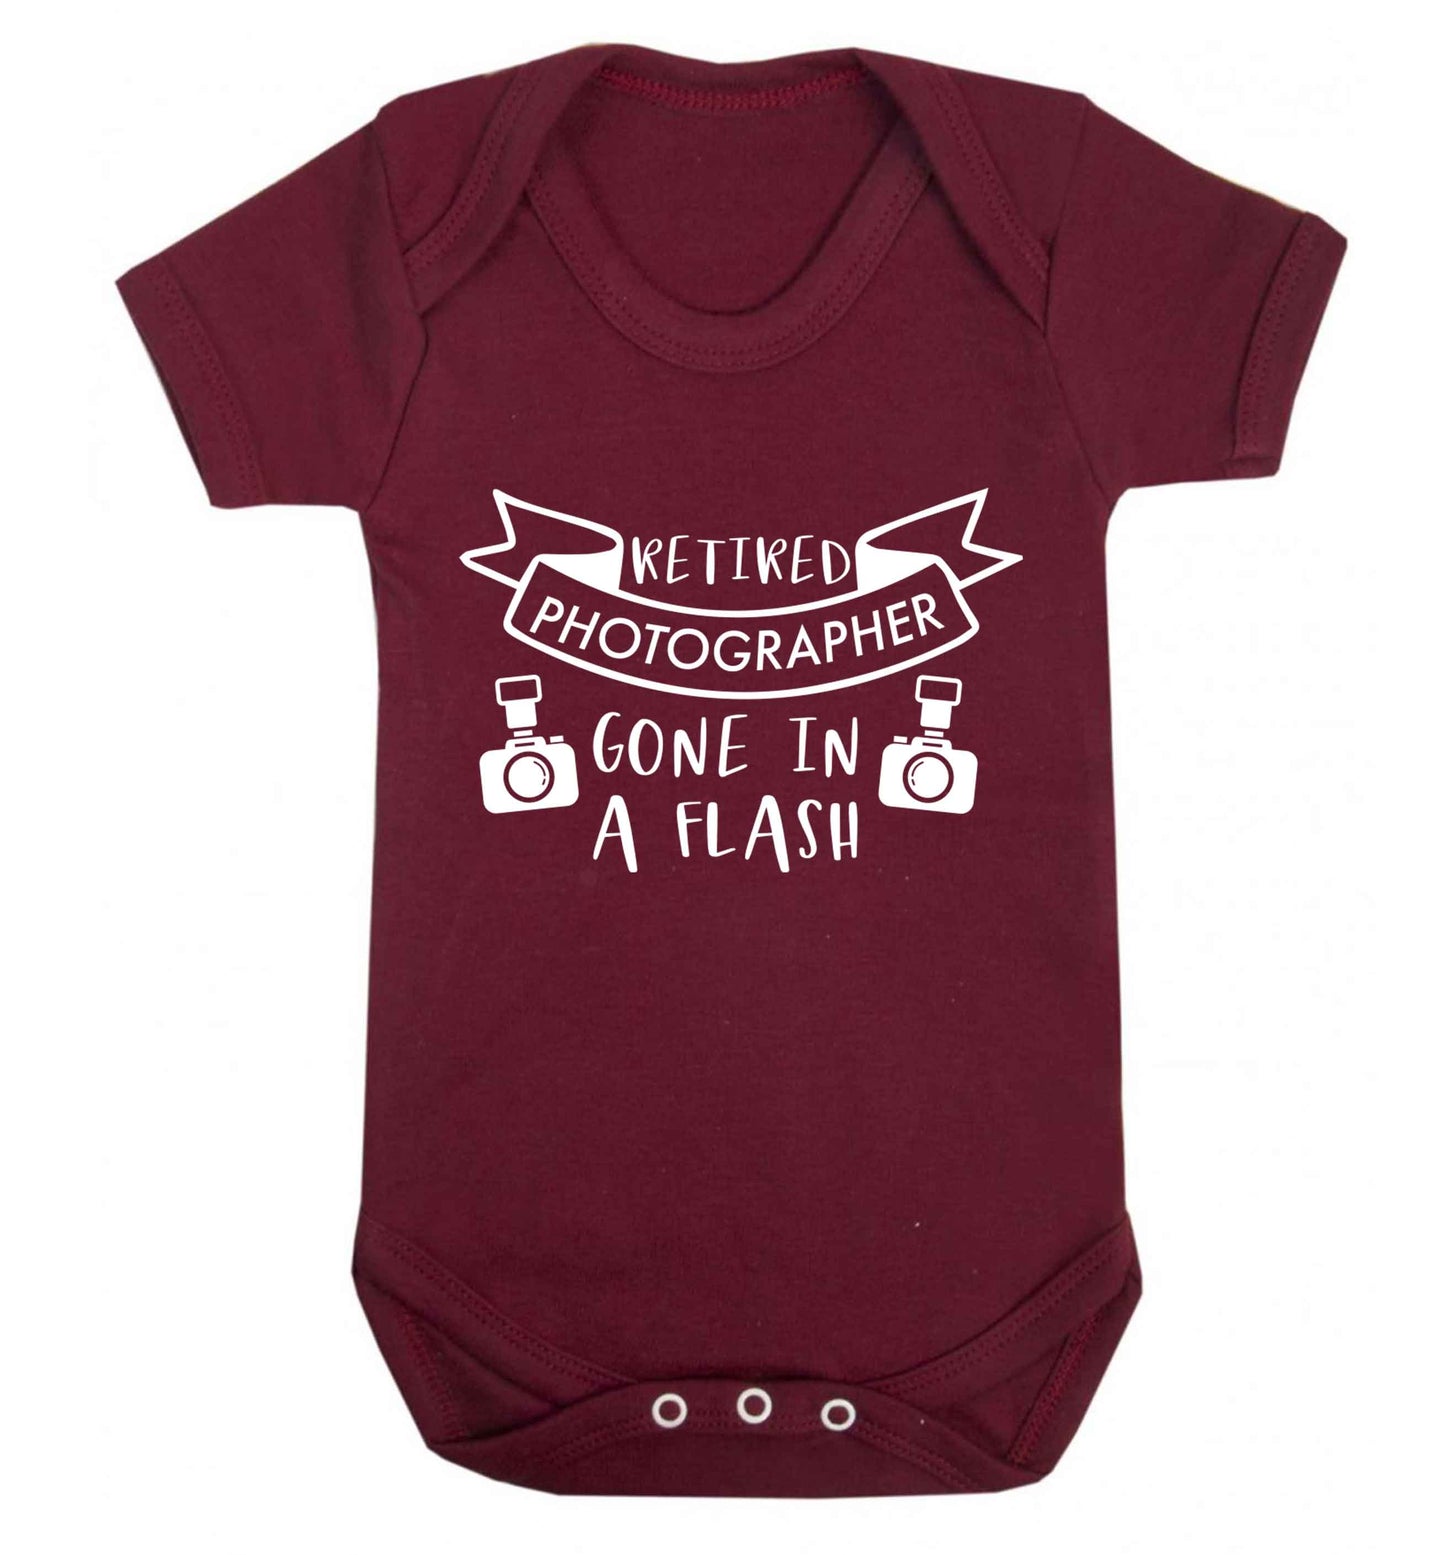 Retired photographer gone in a flash Baby Vest maroon 18-24 months